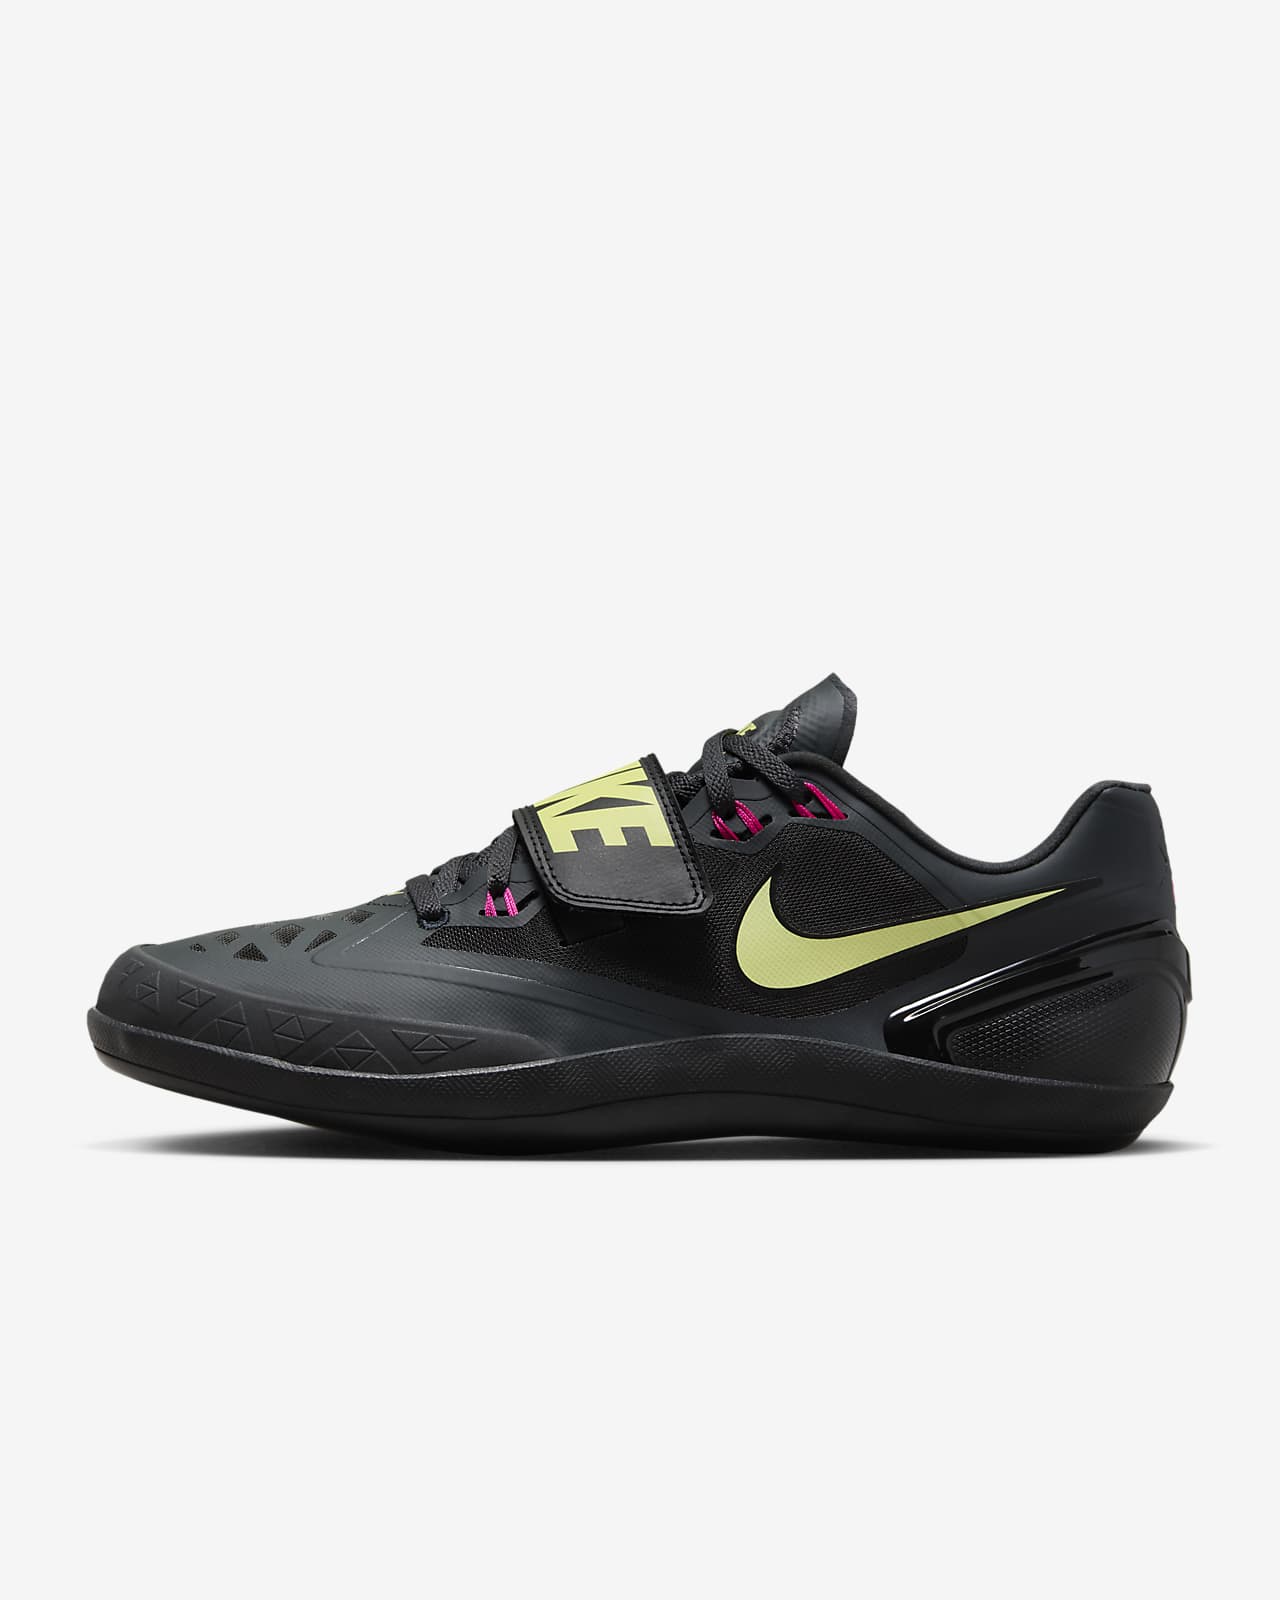 Nike Zoom Rotational 6 Track & Field Throwing Shoes